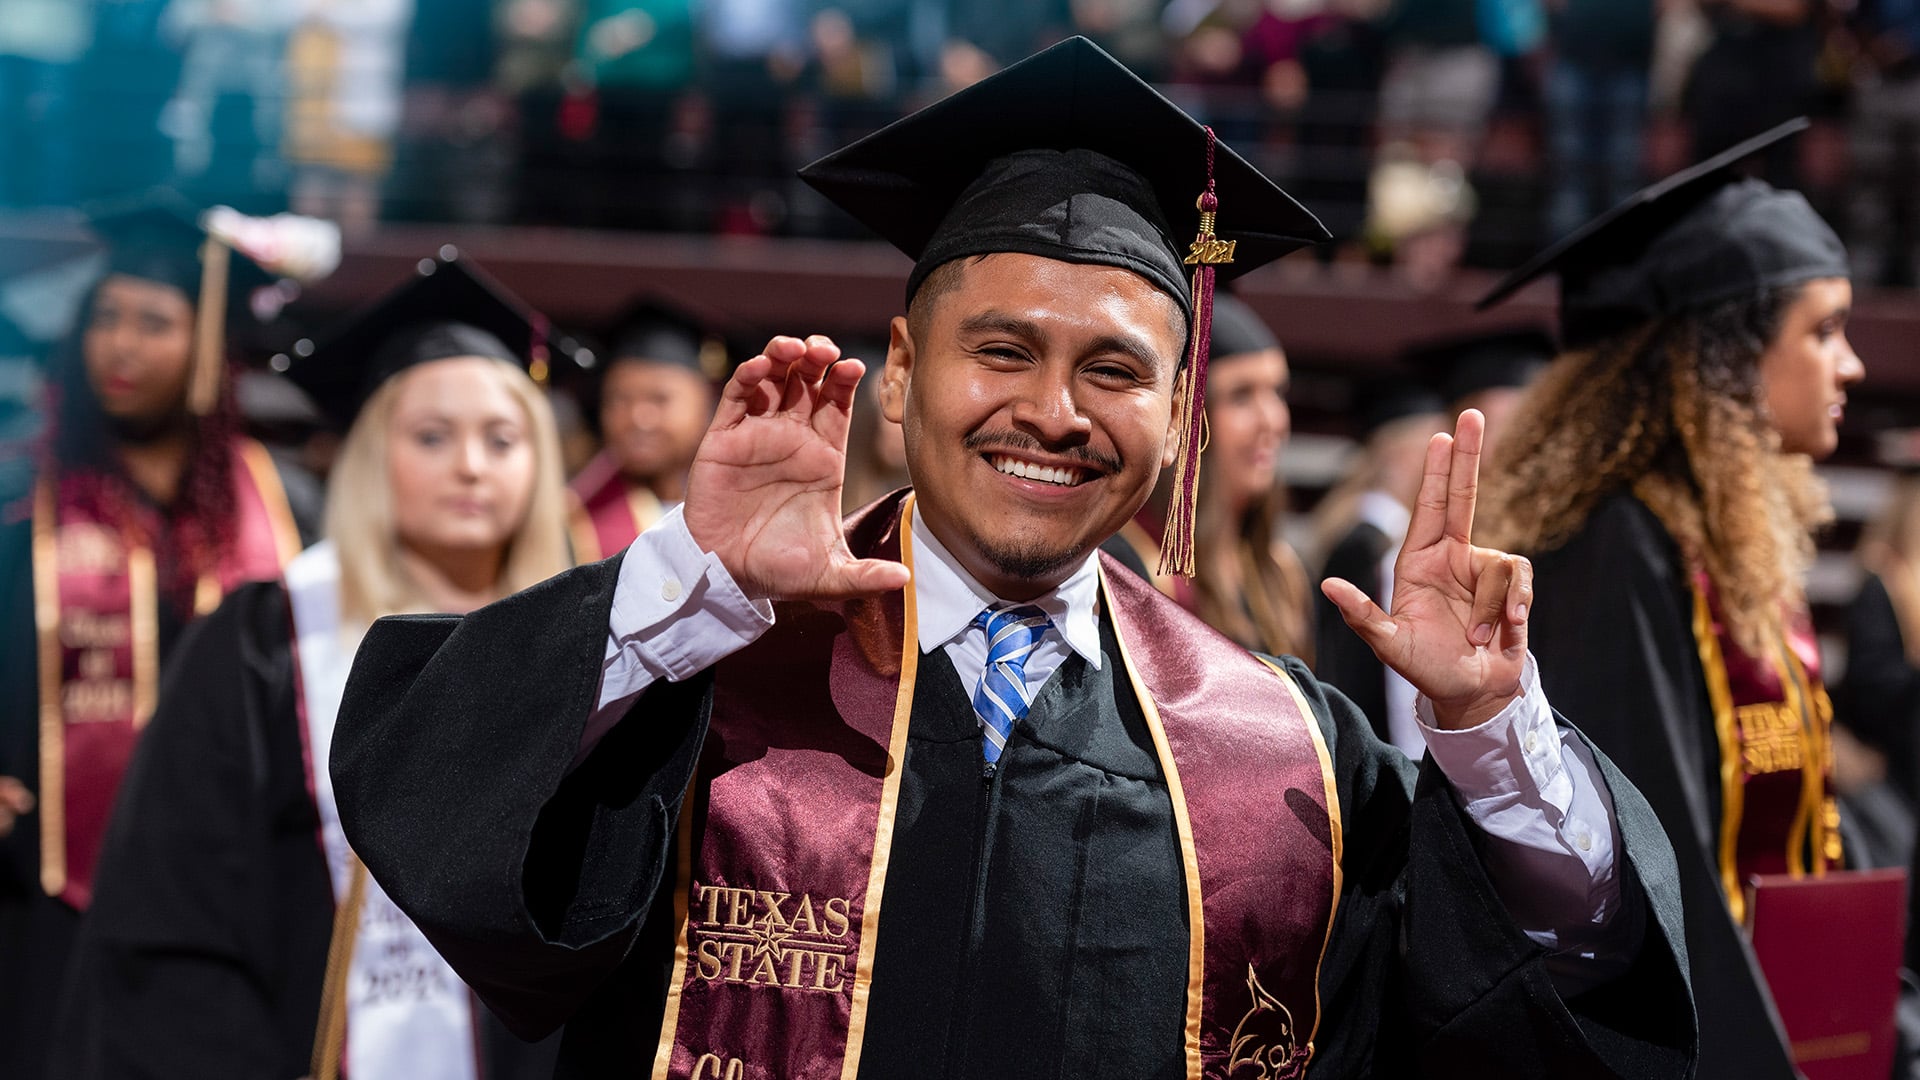 Student smiling at commencement holding Texas State hand sign